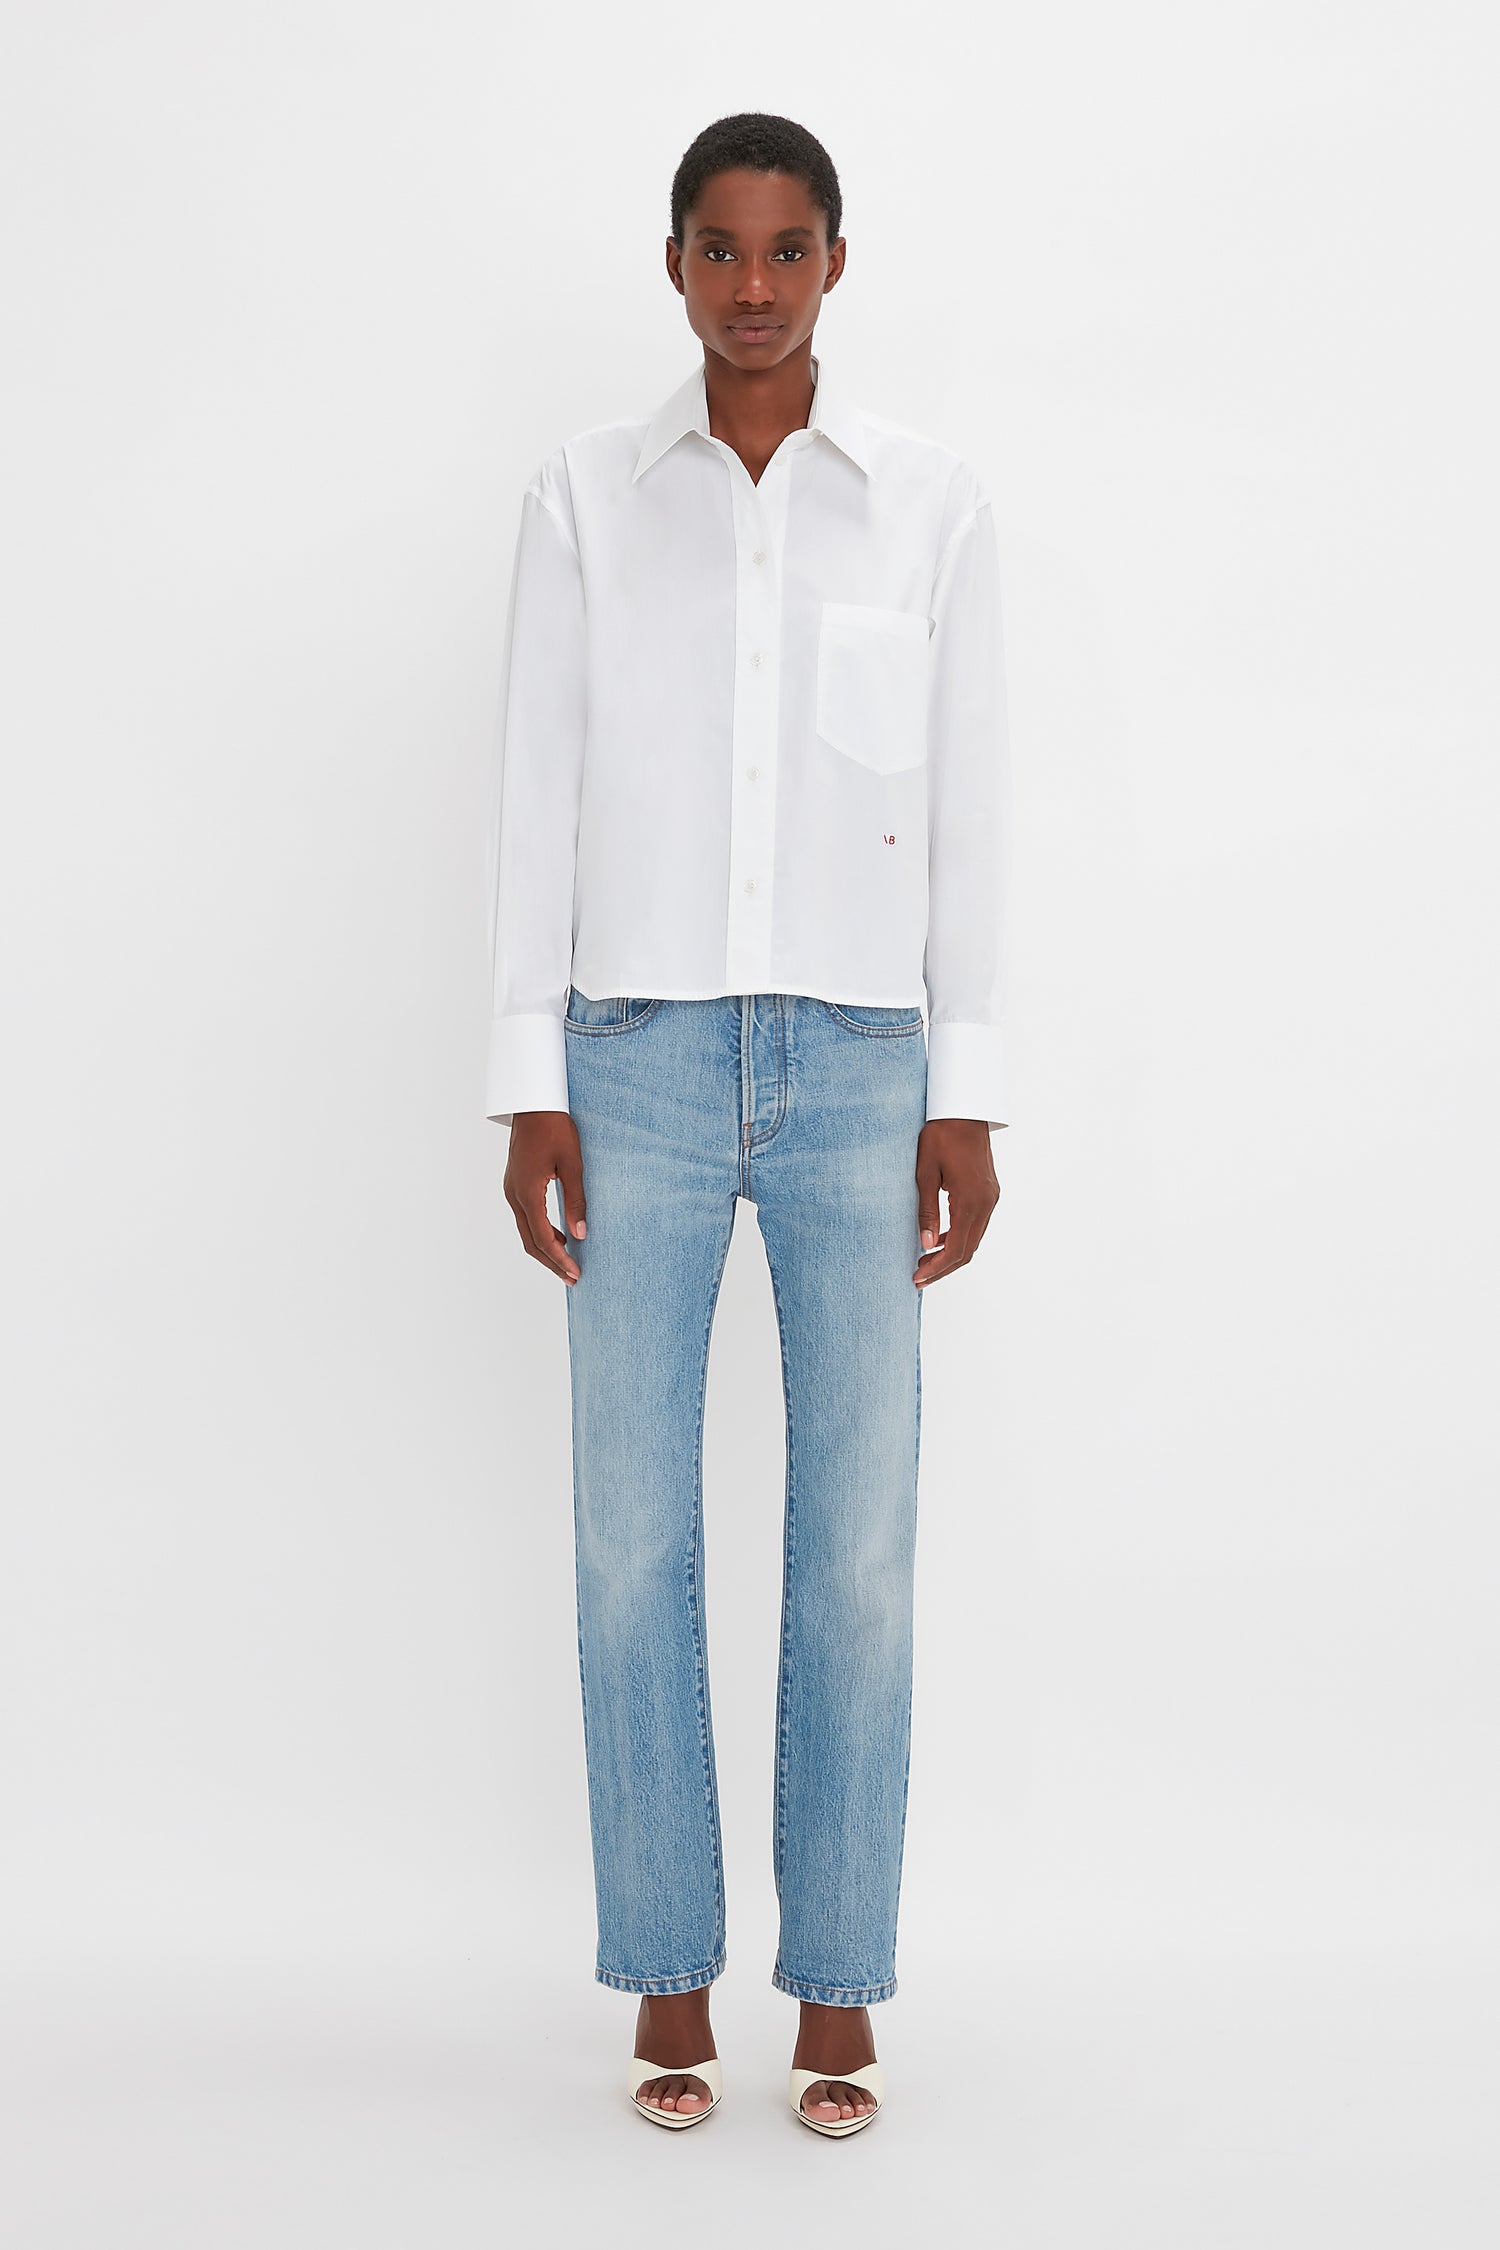 An individual wearing a Victoria Beckham Cropped Long Sleeve Shirt In White, blue jeans, and open-toe sandals stands against a plain white background.